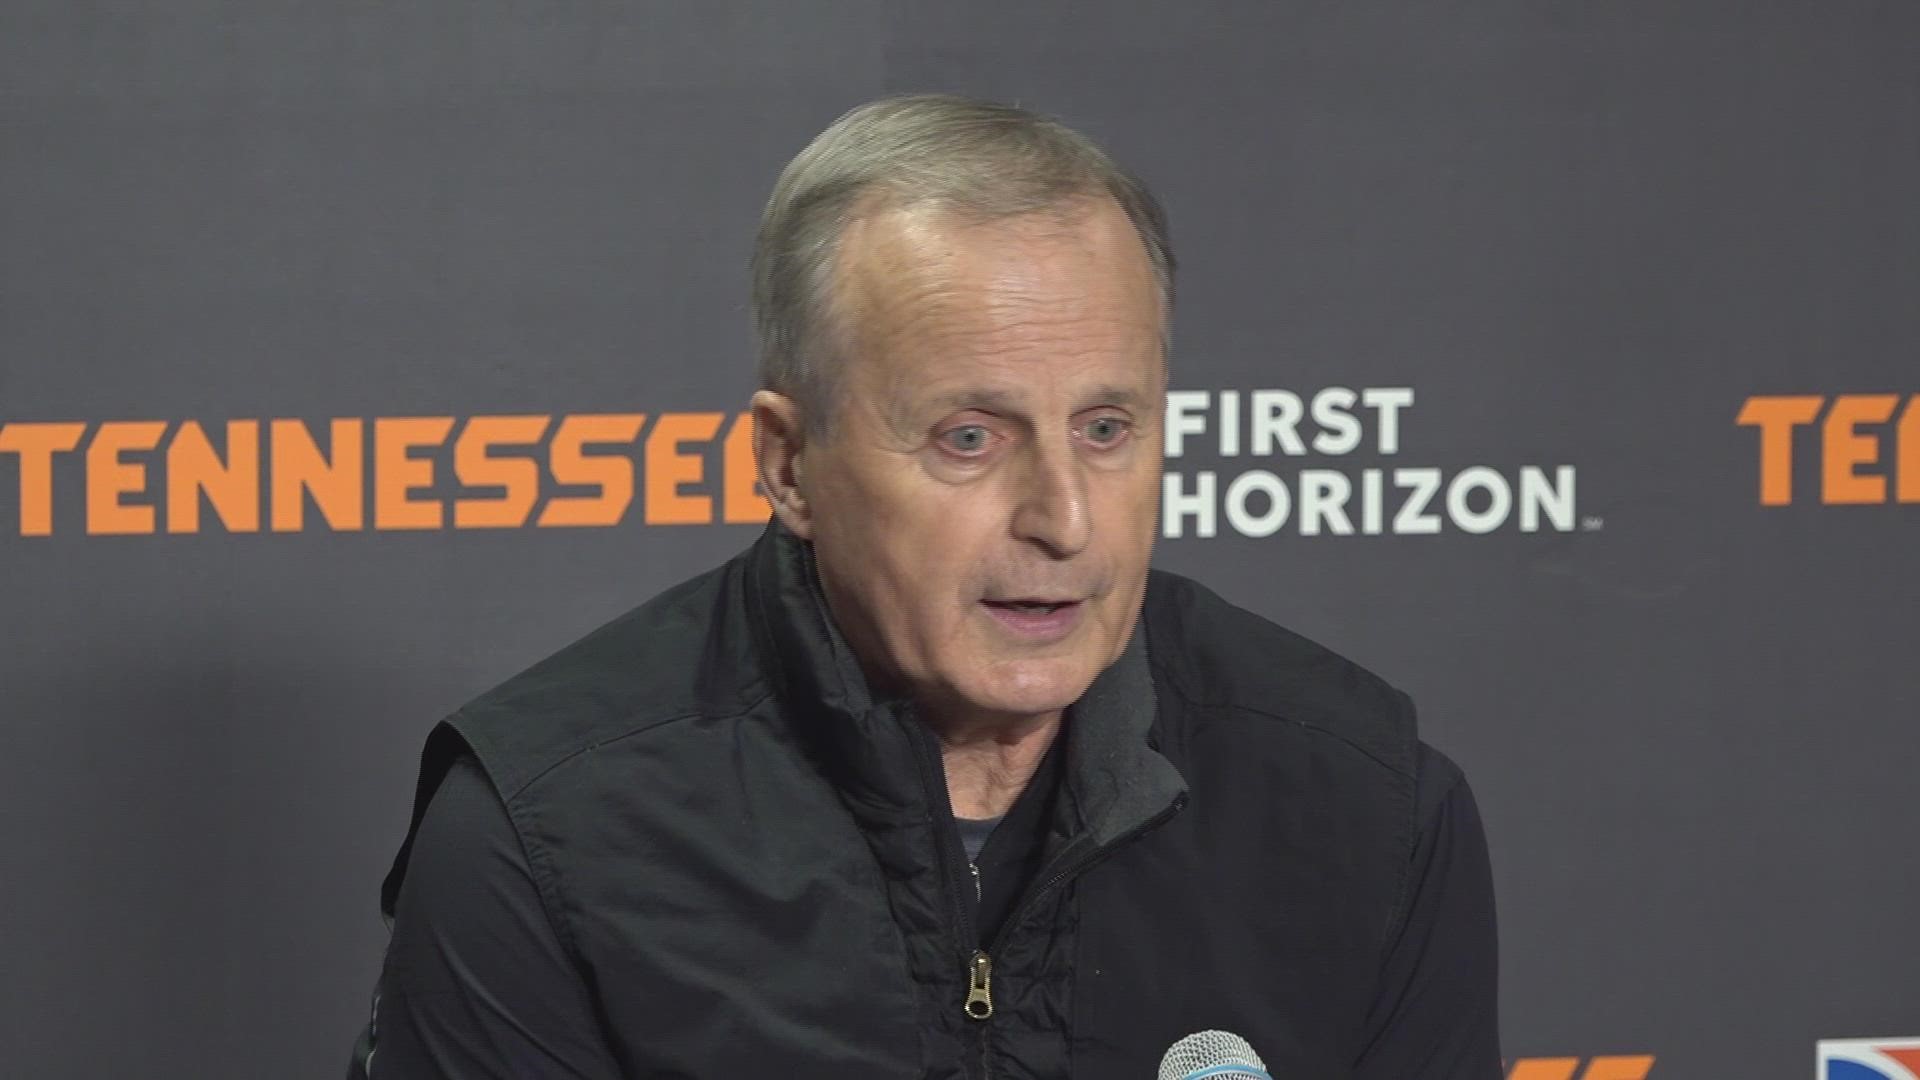 "We're not going to schedule a team that has that many unvaccinated players, "Barnes said on Monday Tennessee will not reschedule the Memphis game.